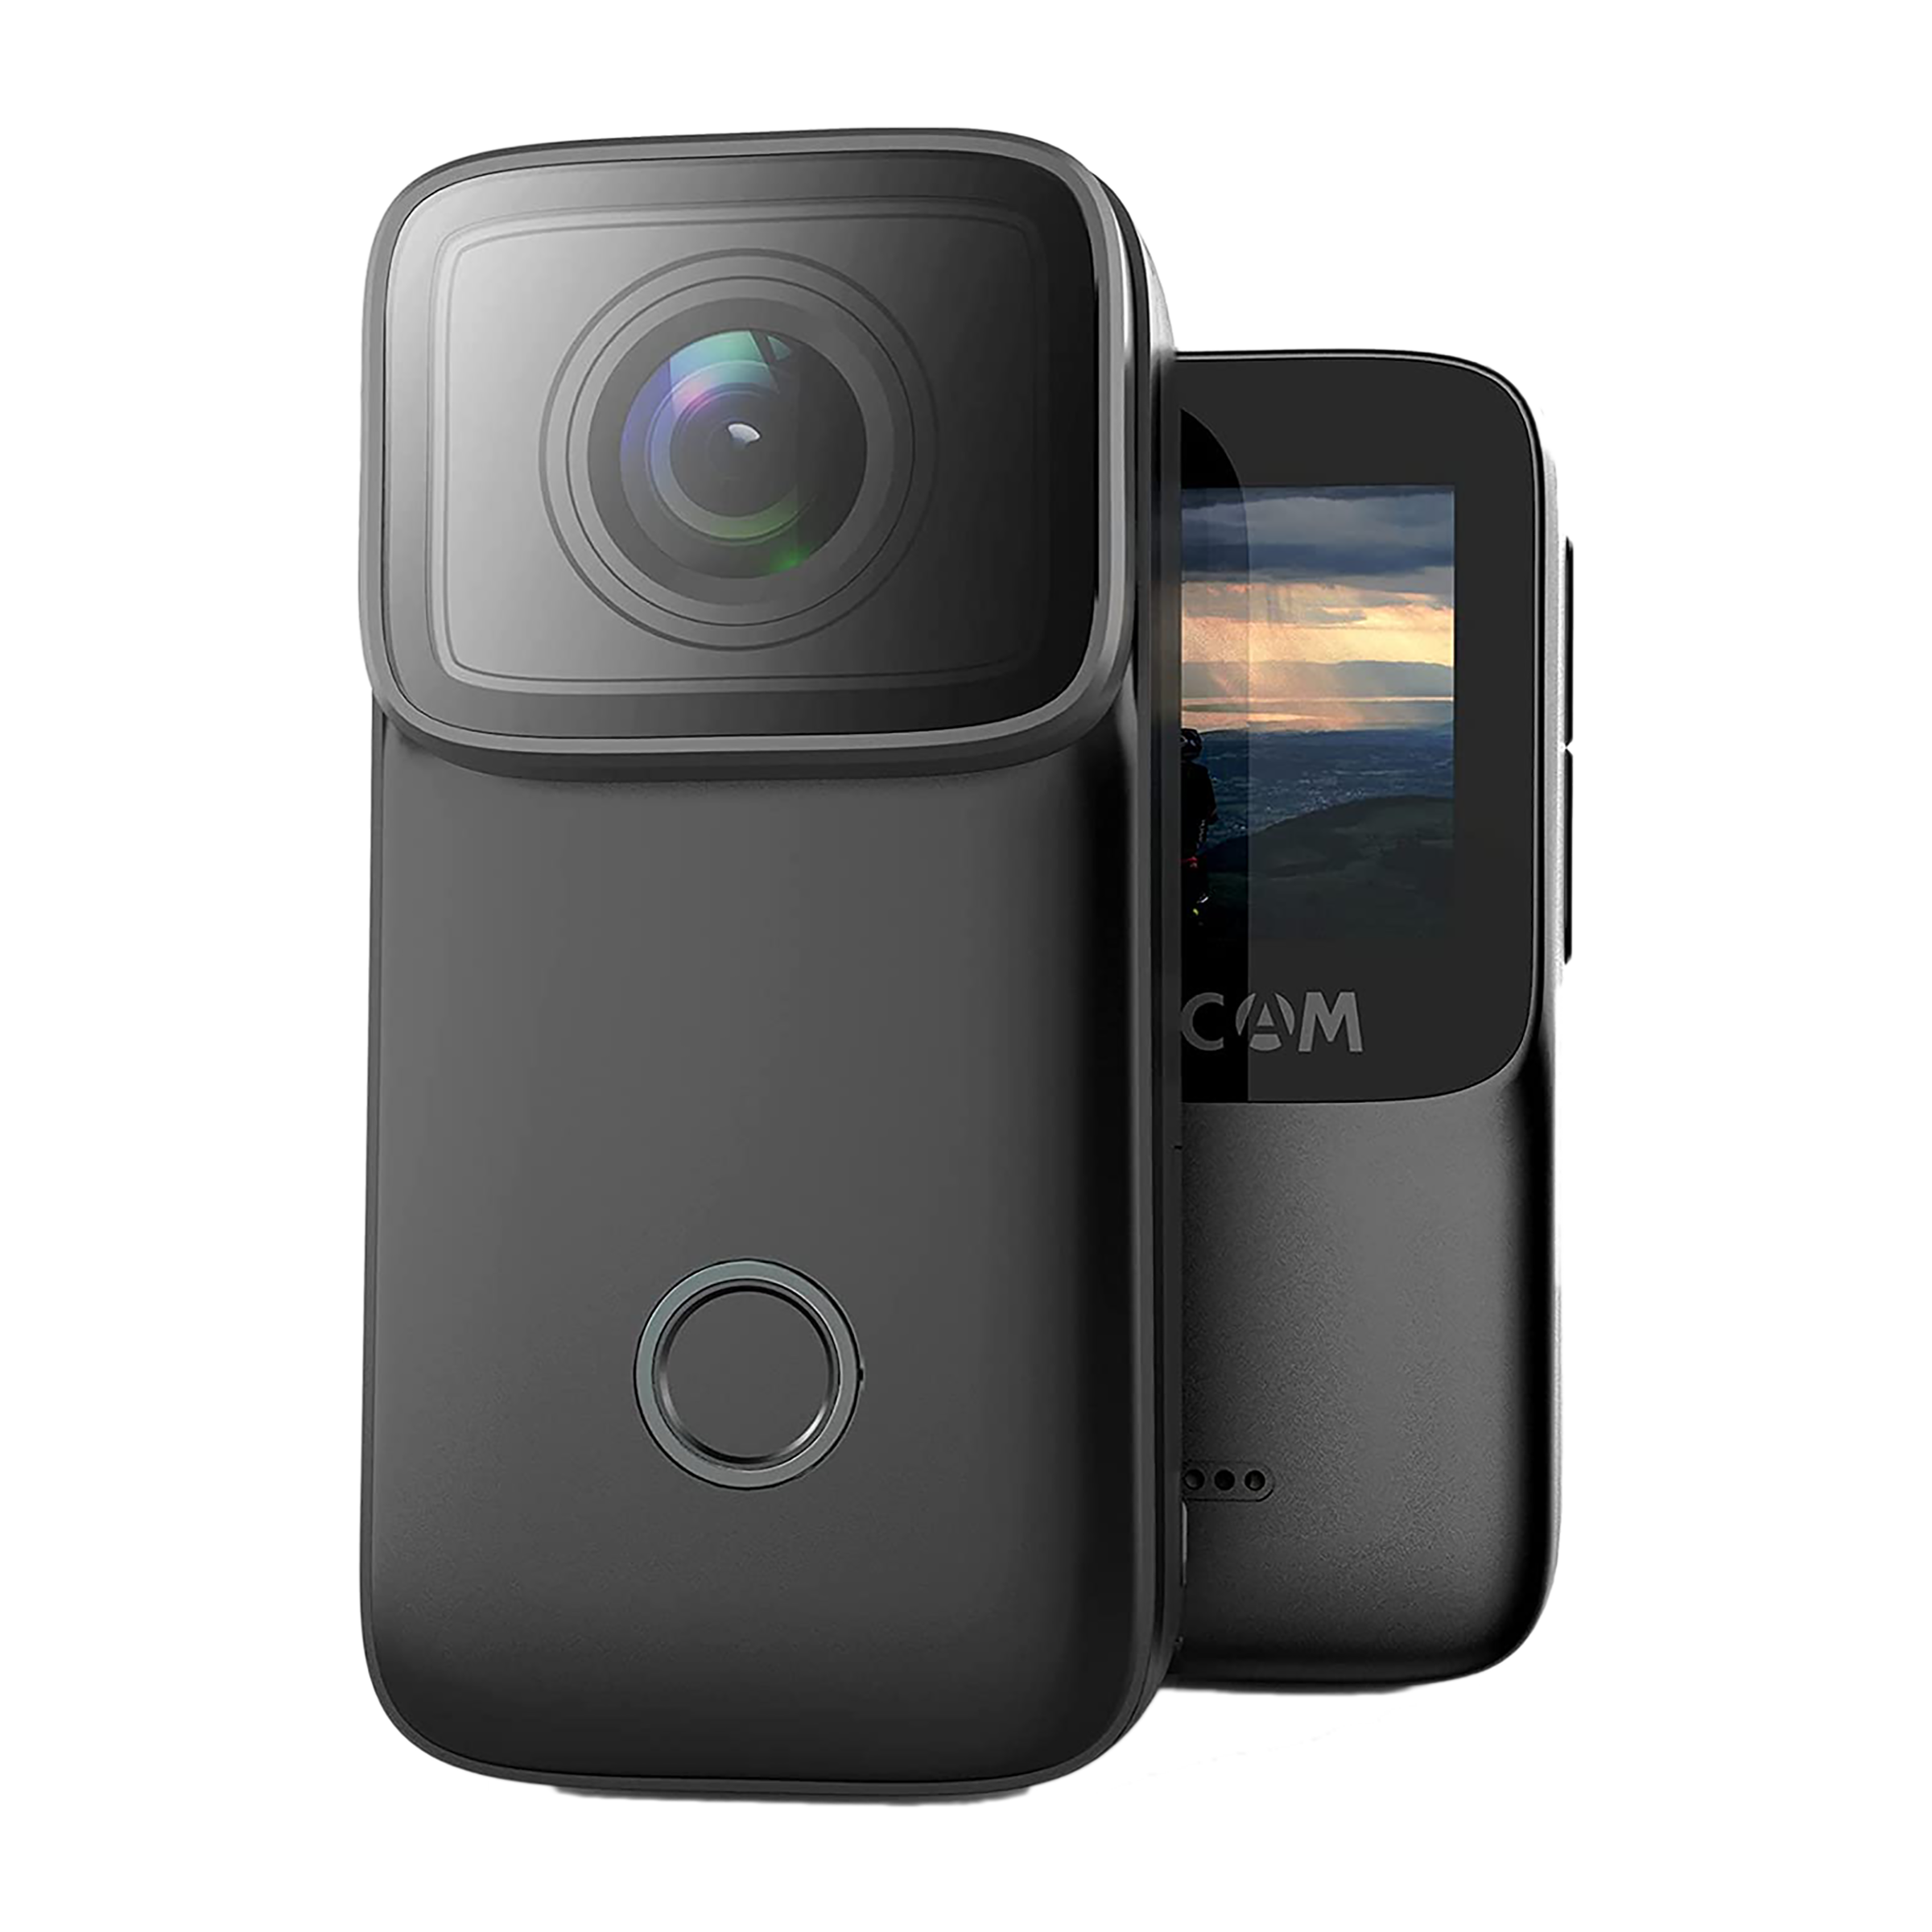 SJCAM C200 4K and 16MP 24 FPS Waterproof Action Camera with Face Recognition (Black)